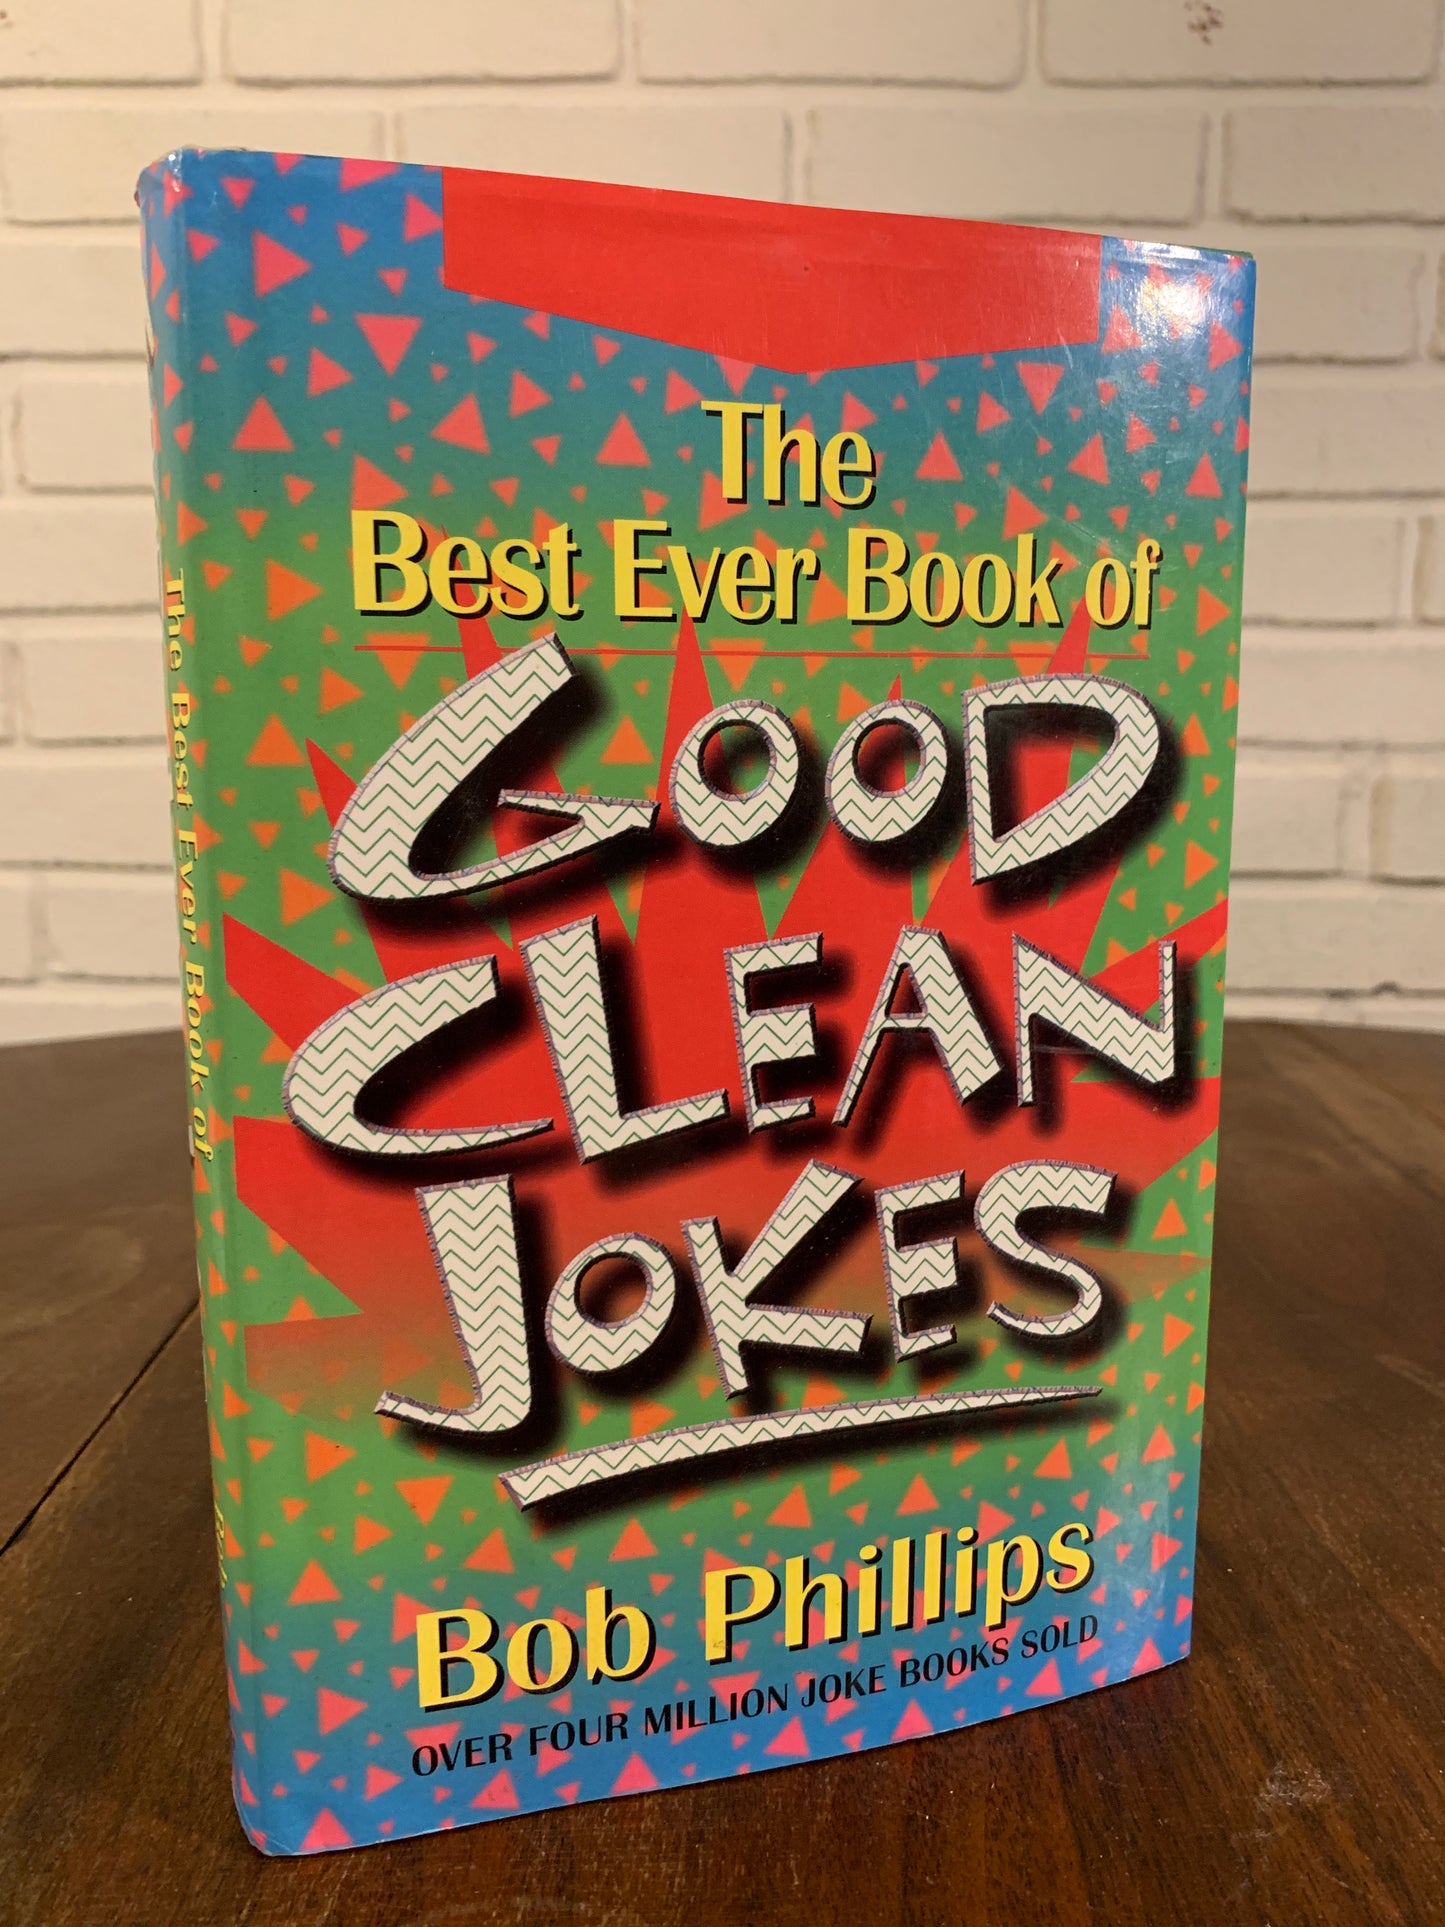 The Best Ever Book of Good Clean Jokes by Bob Phillips 1998 Hardcover